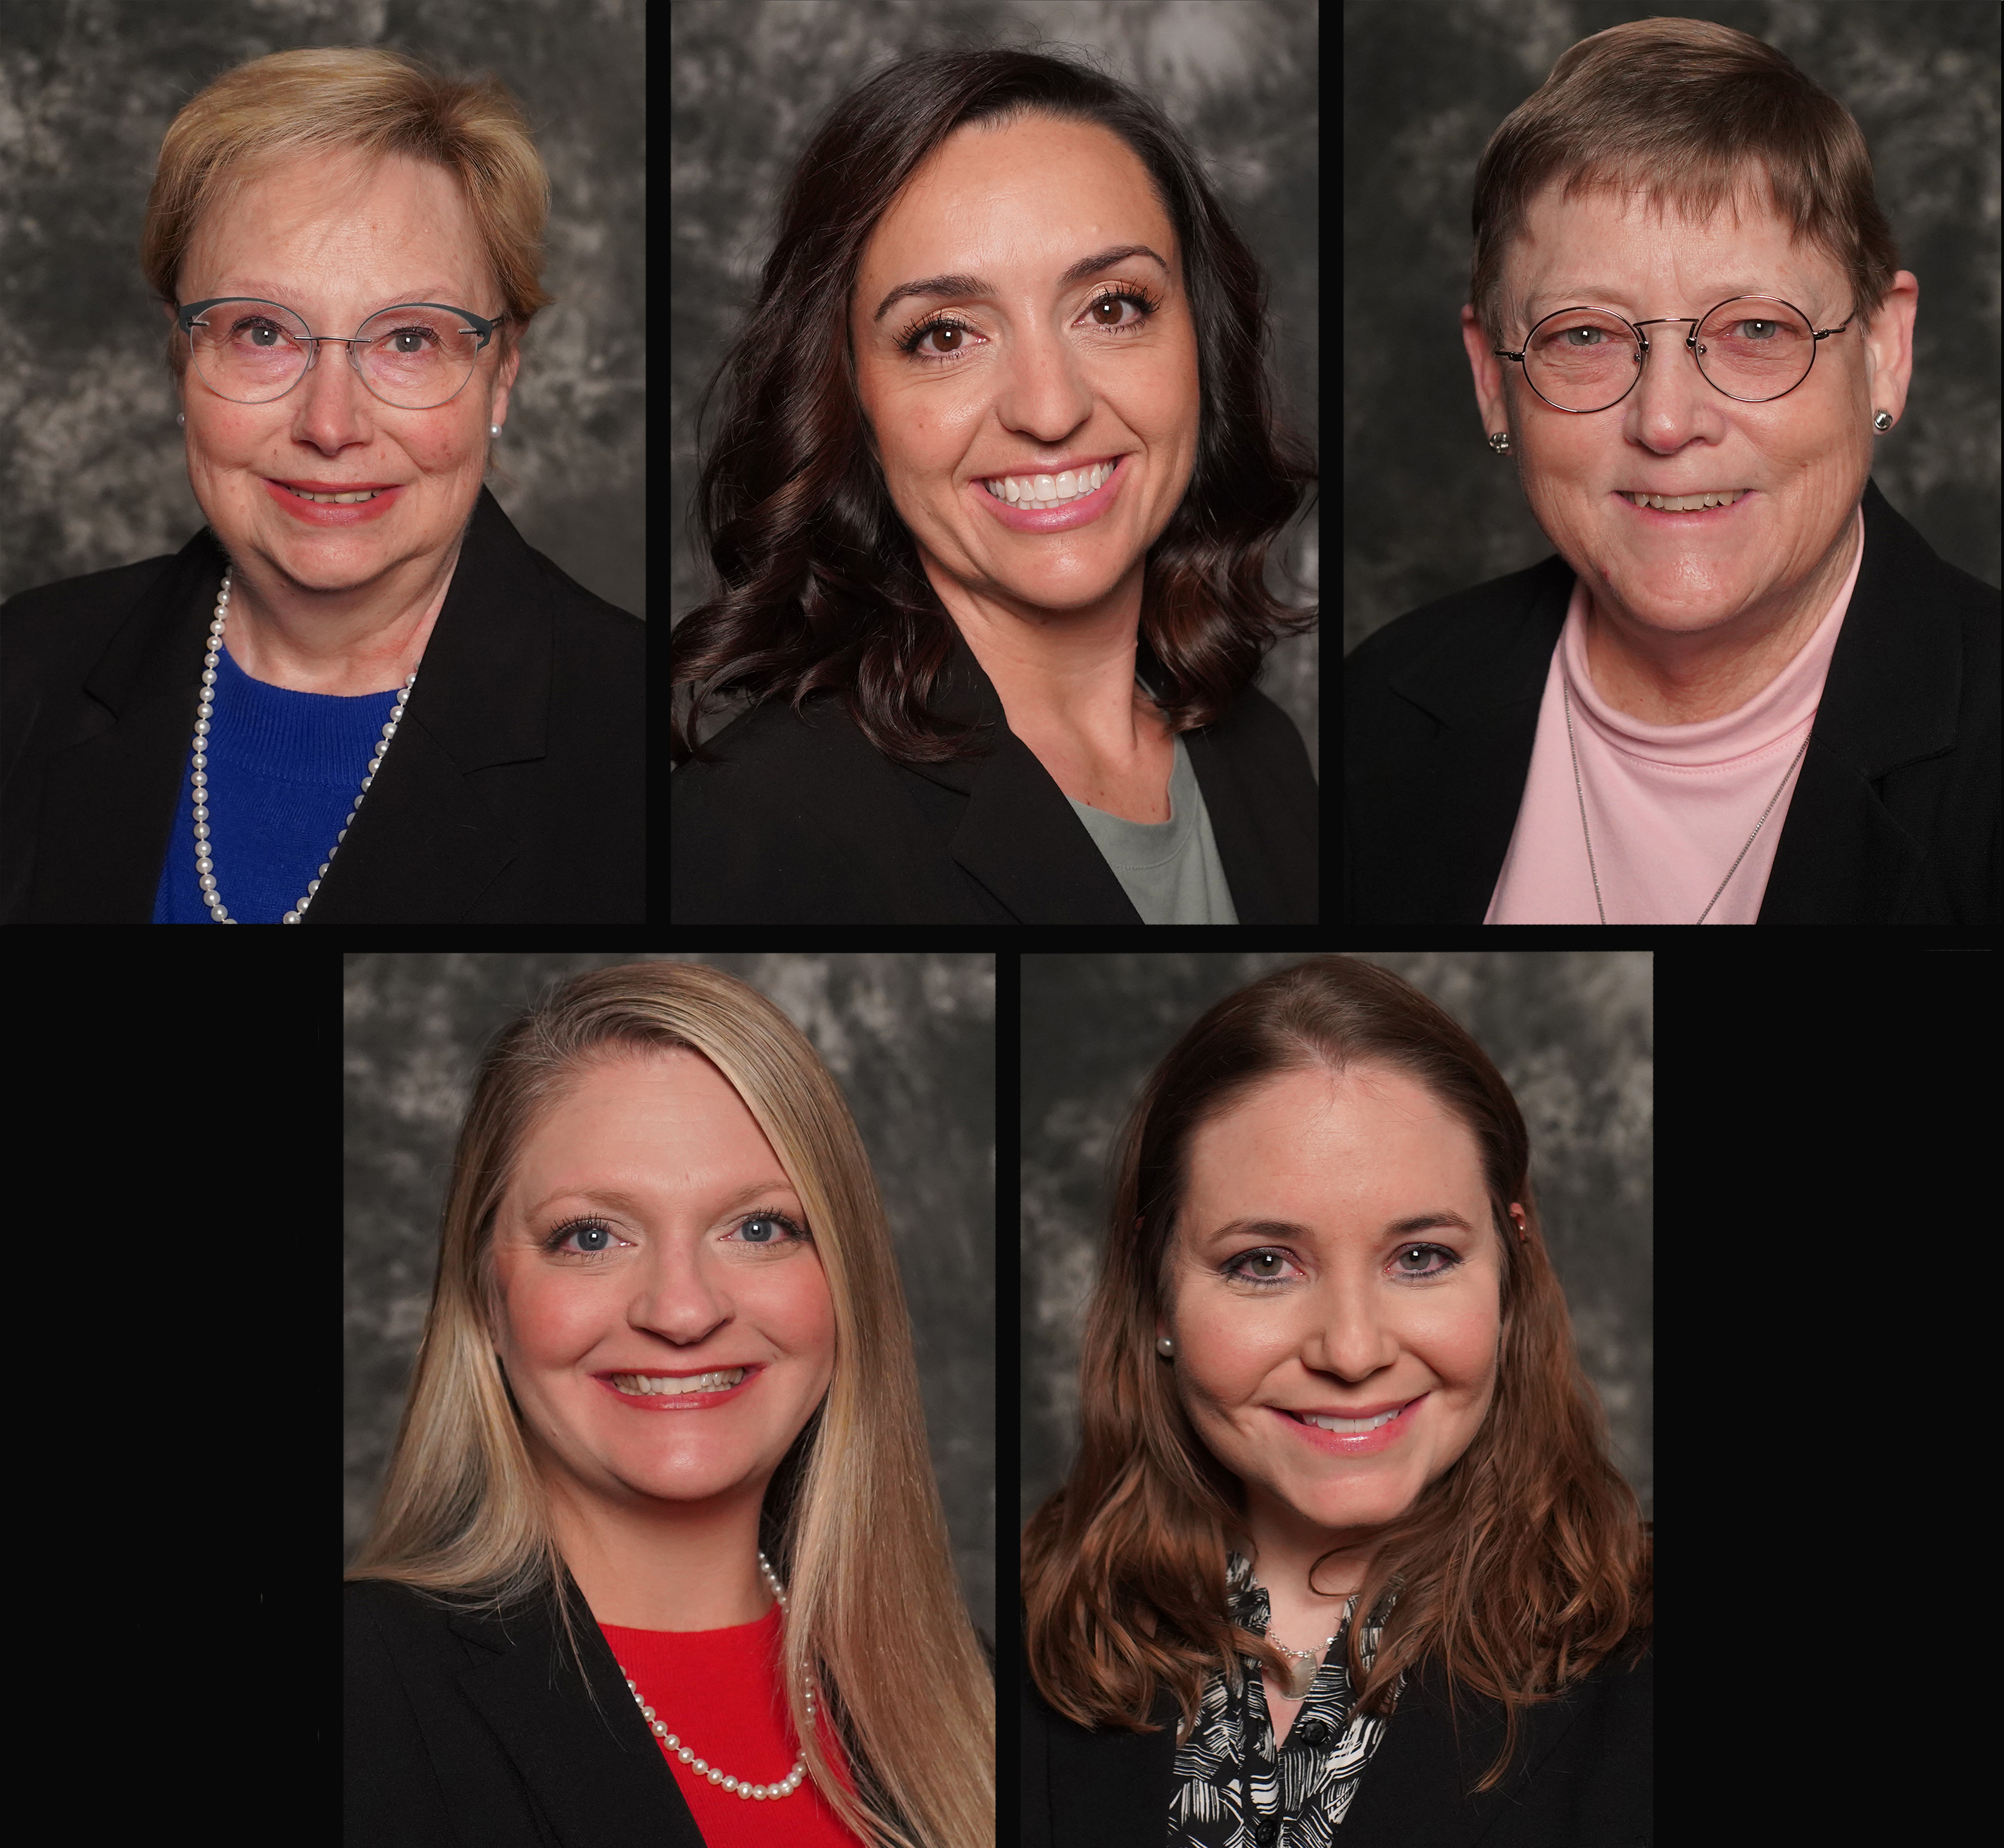 The nominees for the 2022 Rick Perkins Award are: (top row, left to right) Anne Clay, Brittany Cochran, Donna Estes (bottom row, left to right) Crista Resch and Kimberly Temple.